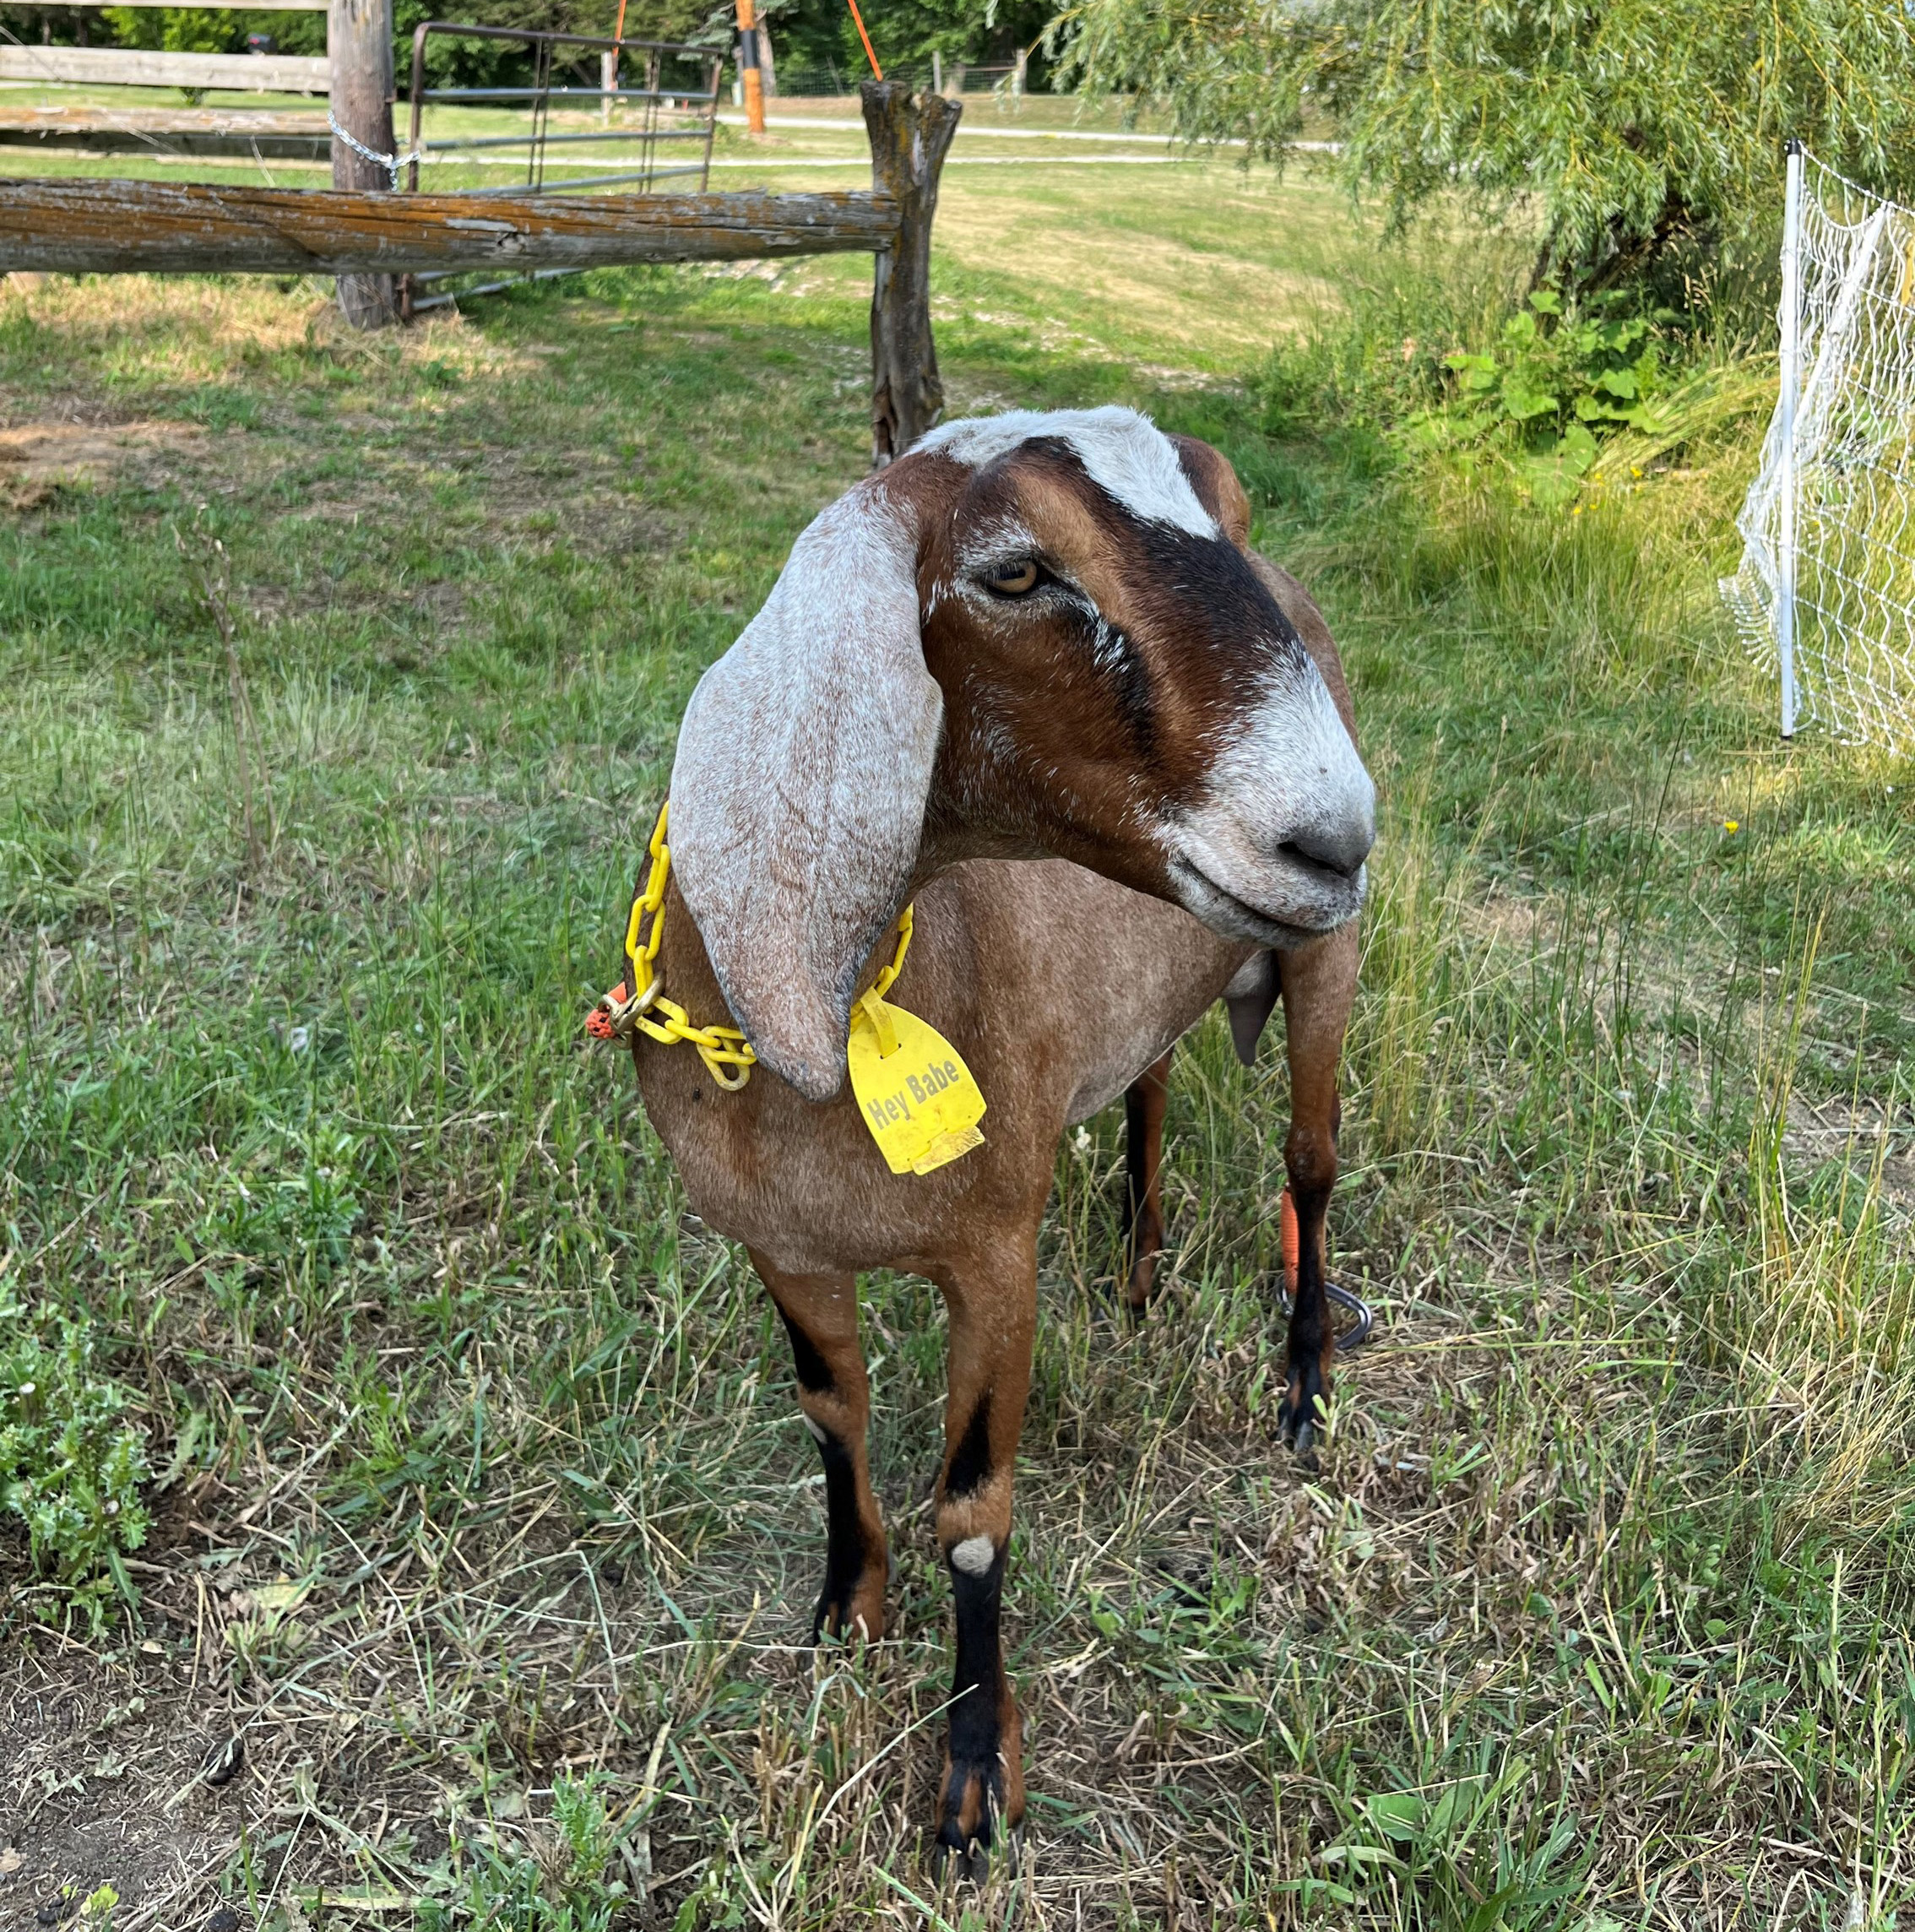 A photo of a goat outside.